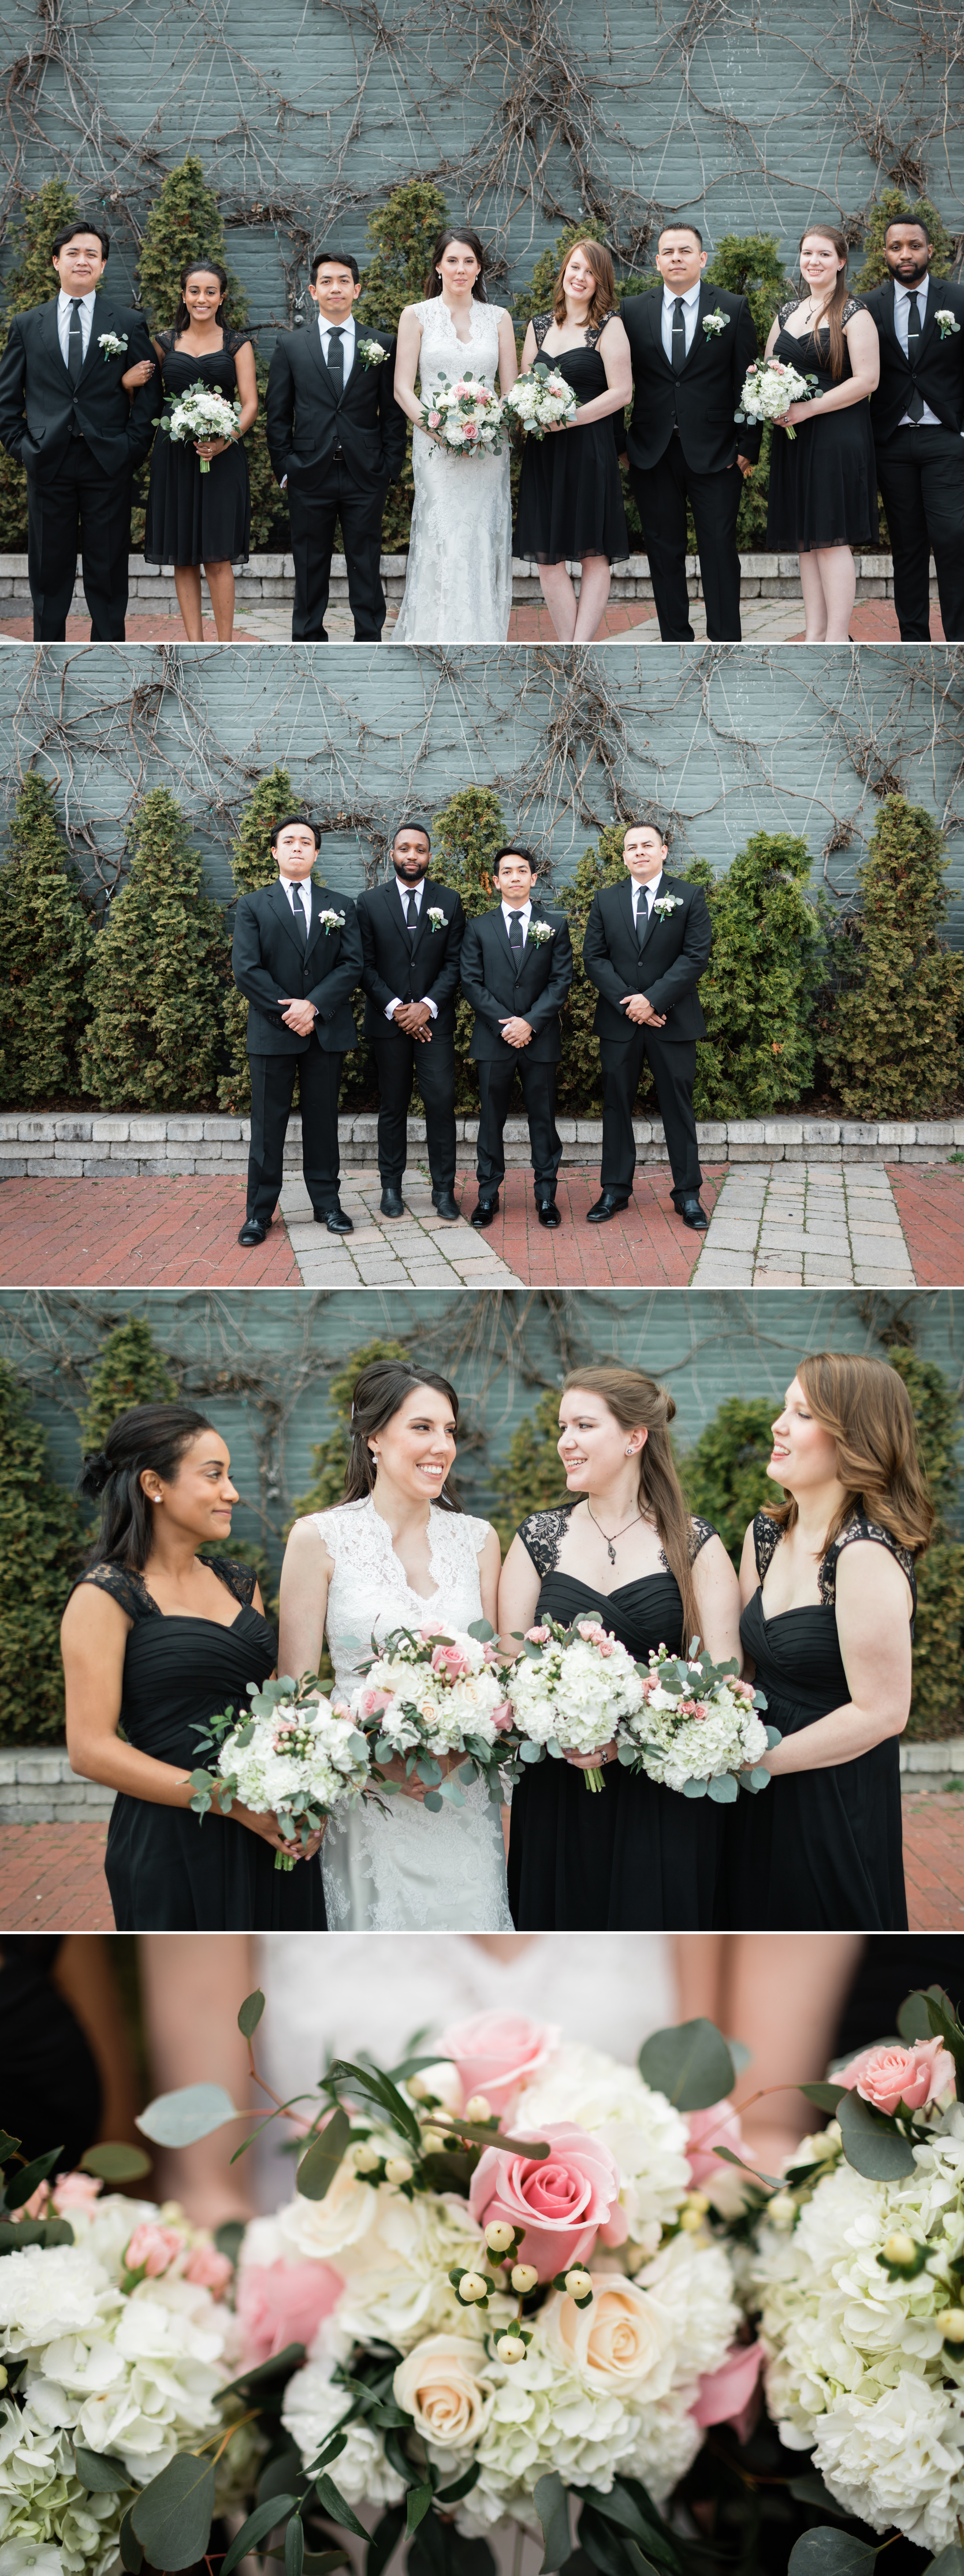 Bridal party photos at the Marriott during an Intimate Wedding in Livonia